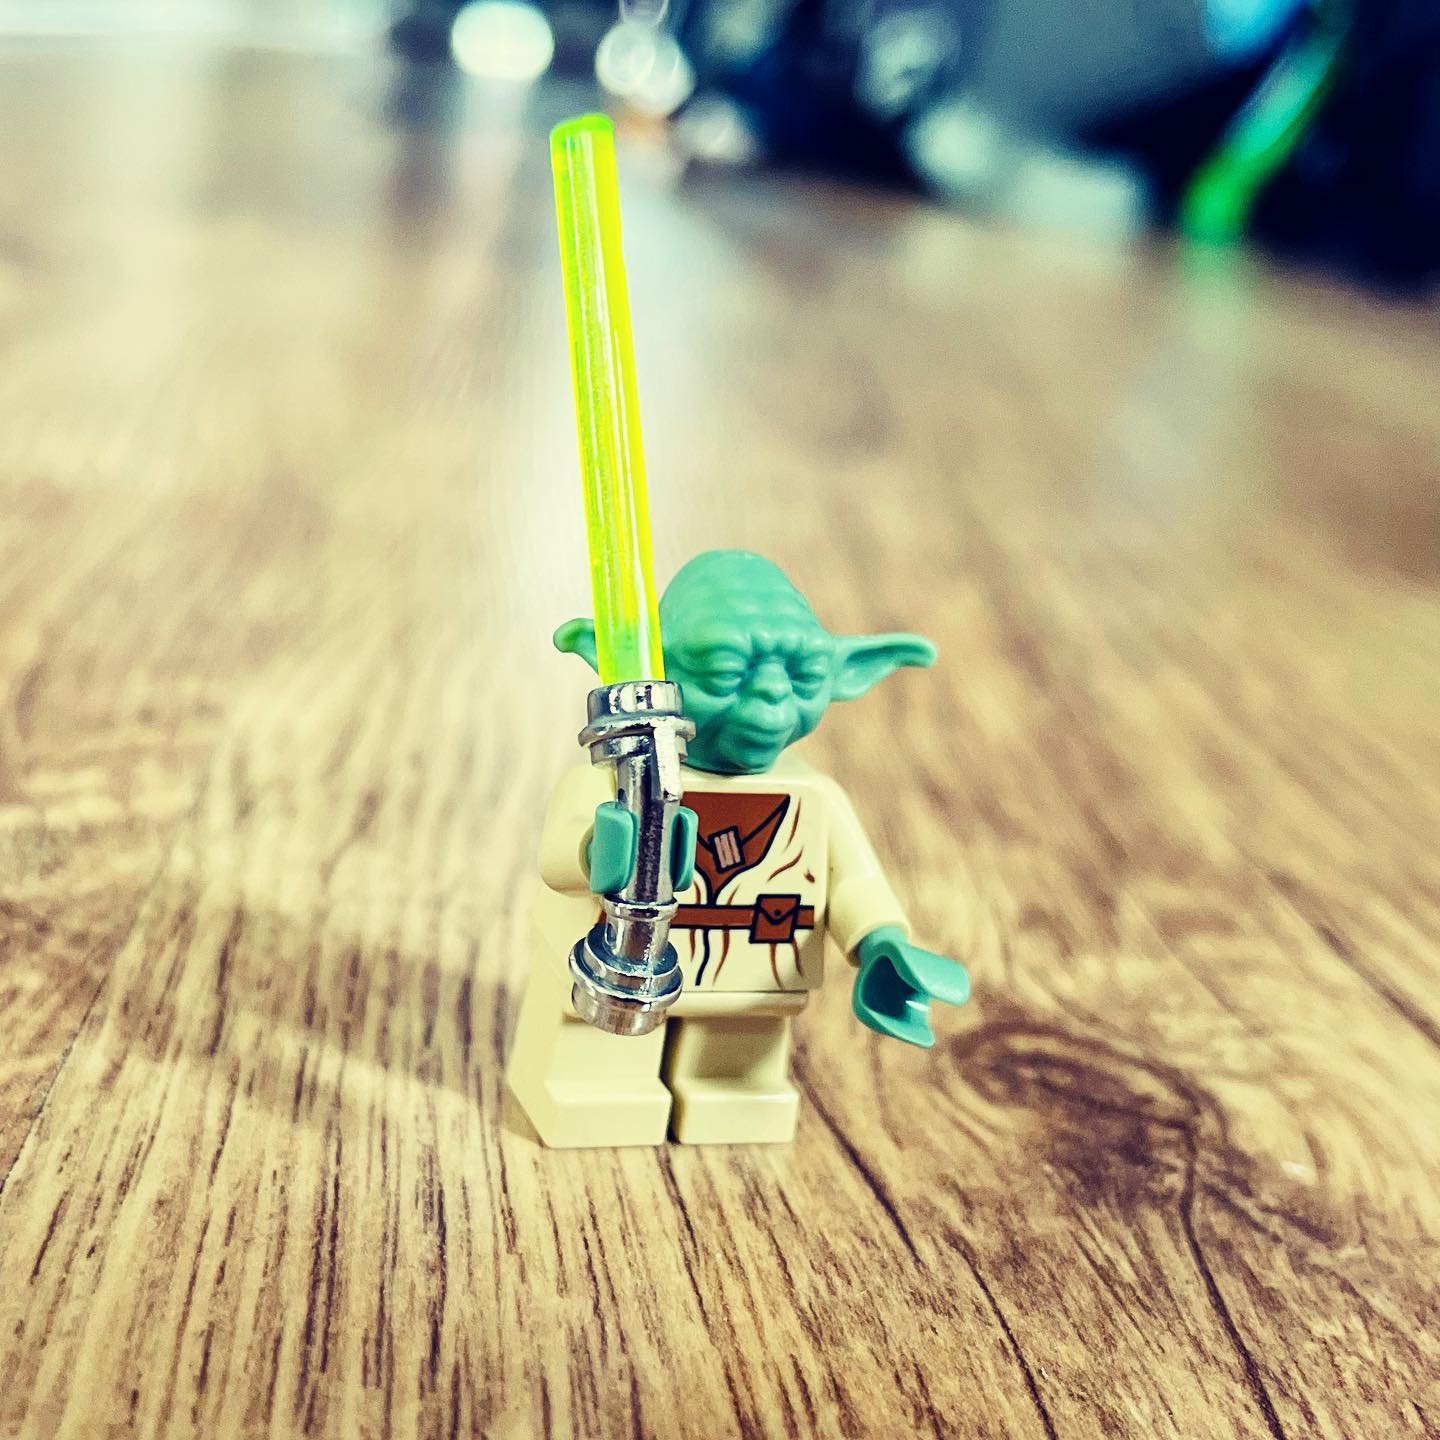 “If no mistake you have made, losing you are. A different game you should play.” – Yoda